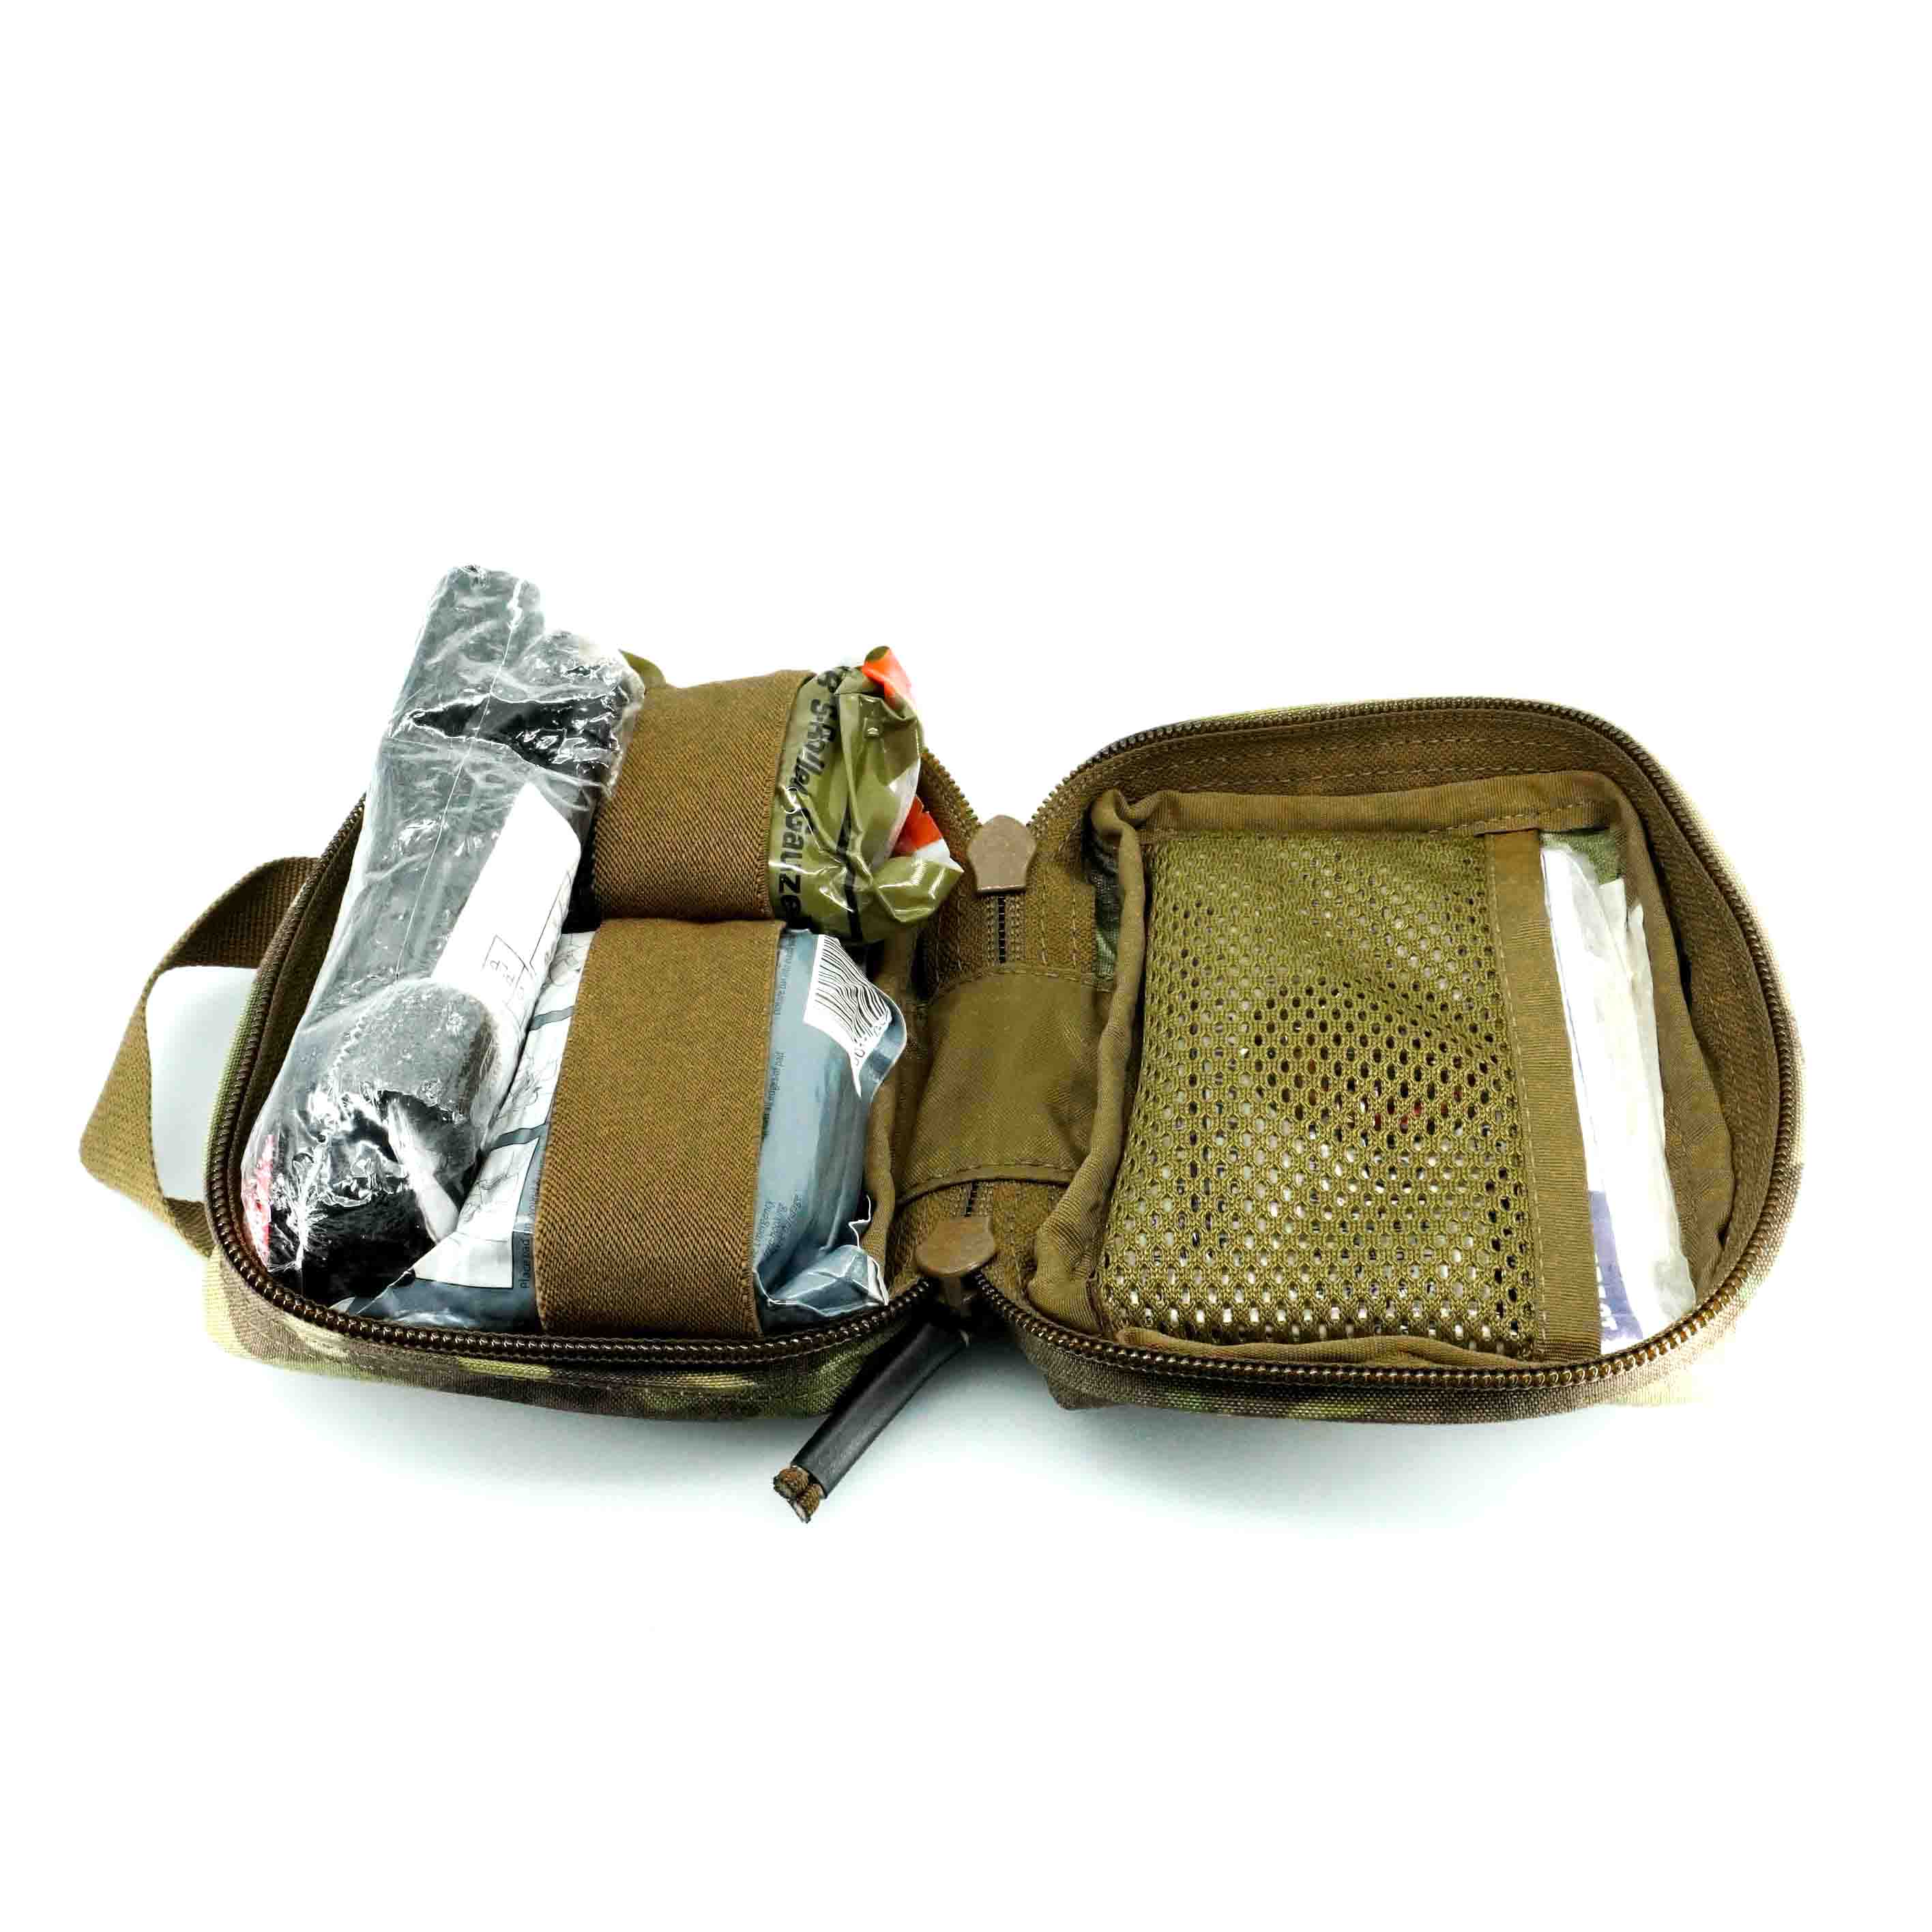 IFAK Medical Pouch with QD Holder - Sabre Tactical